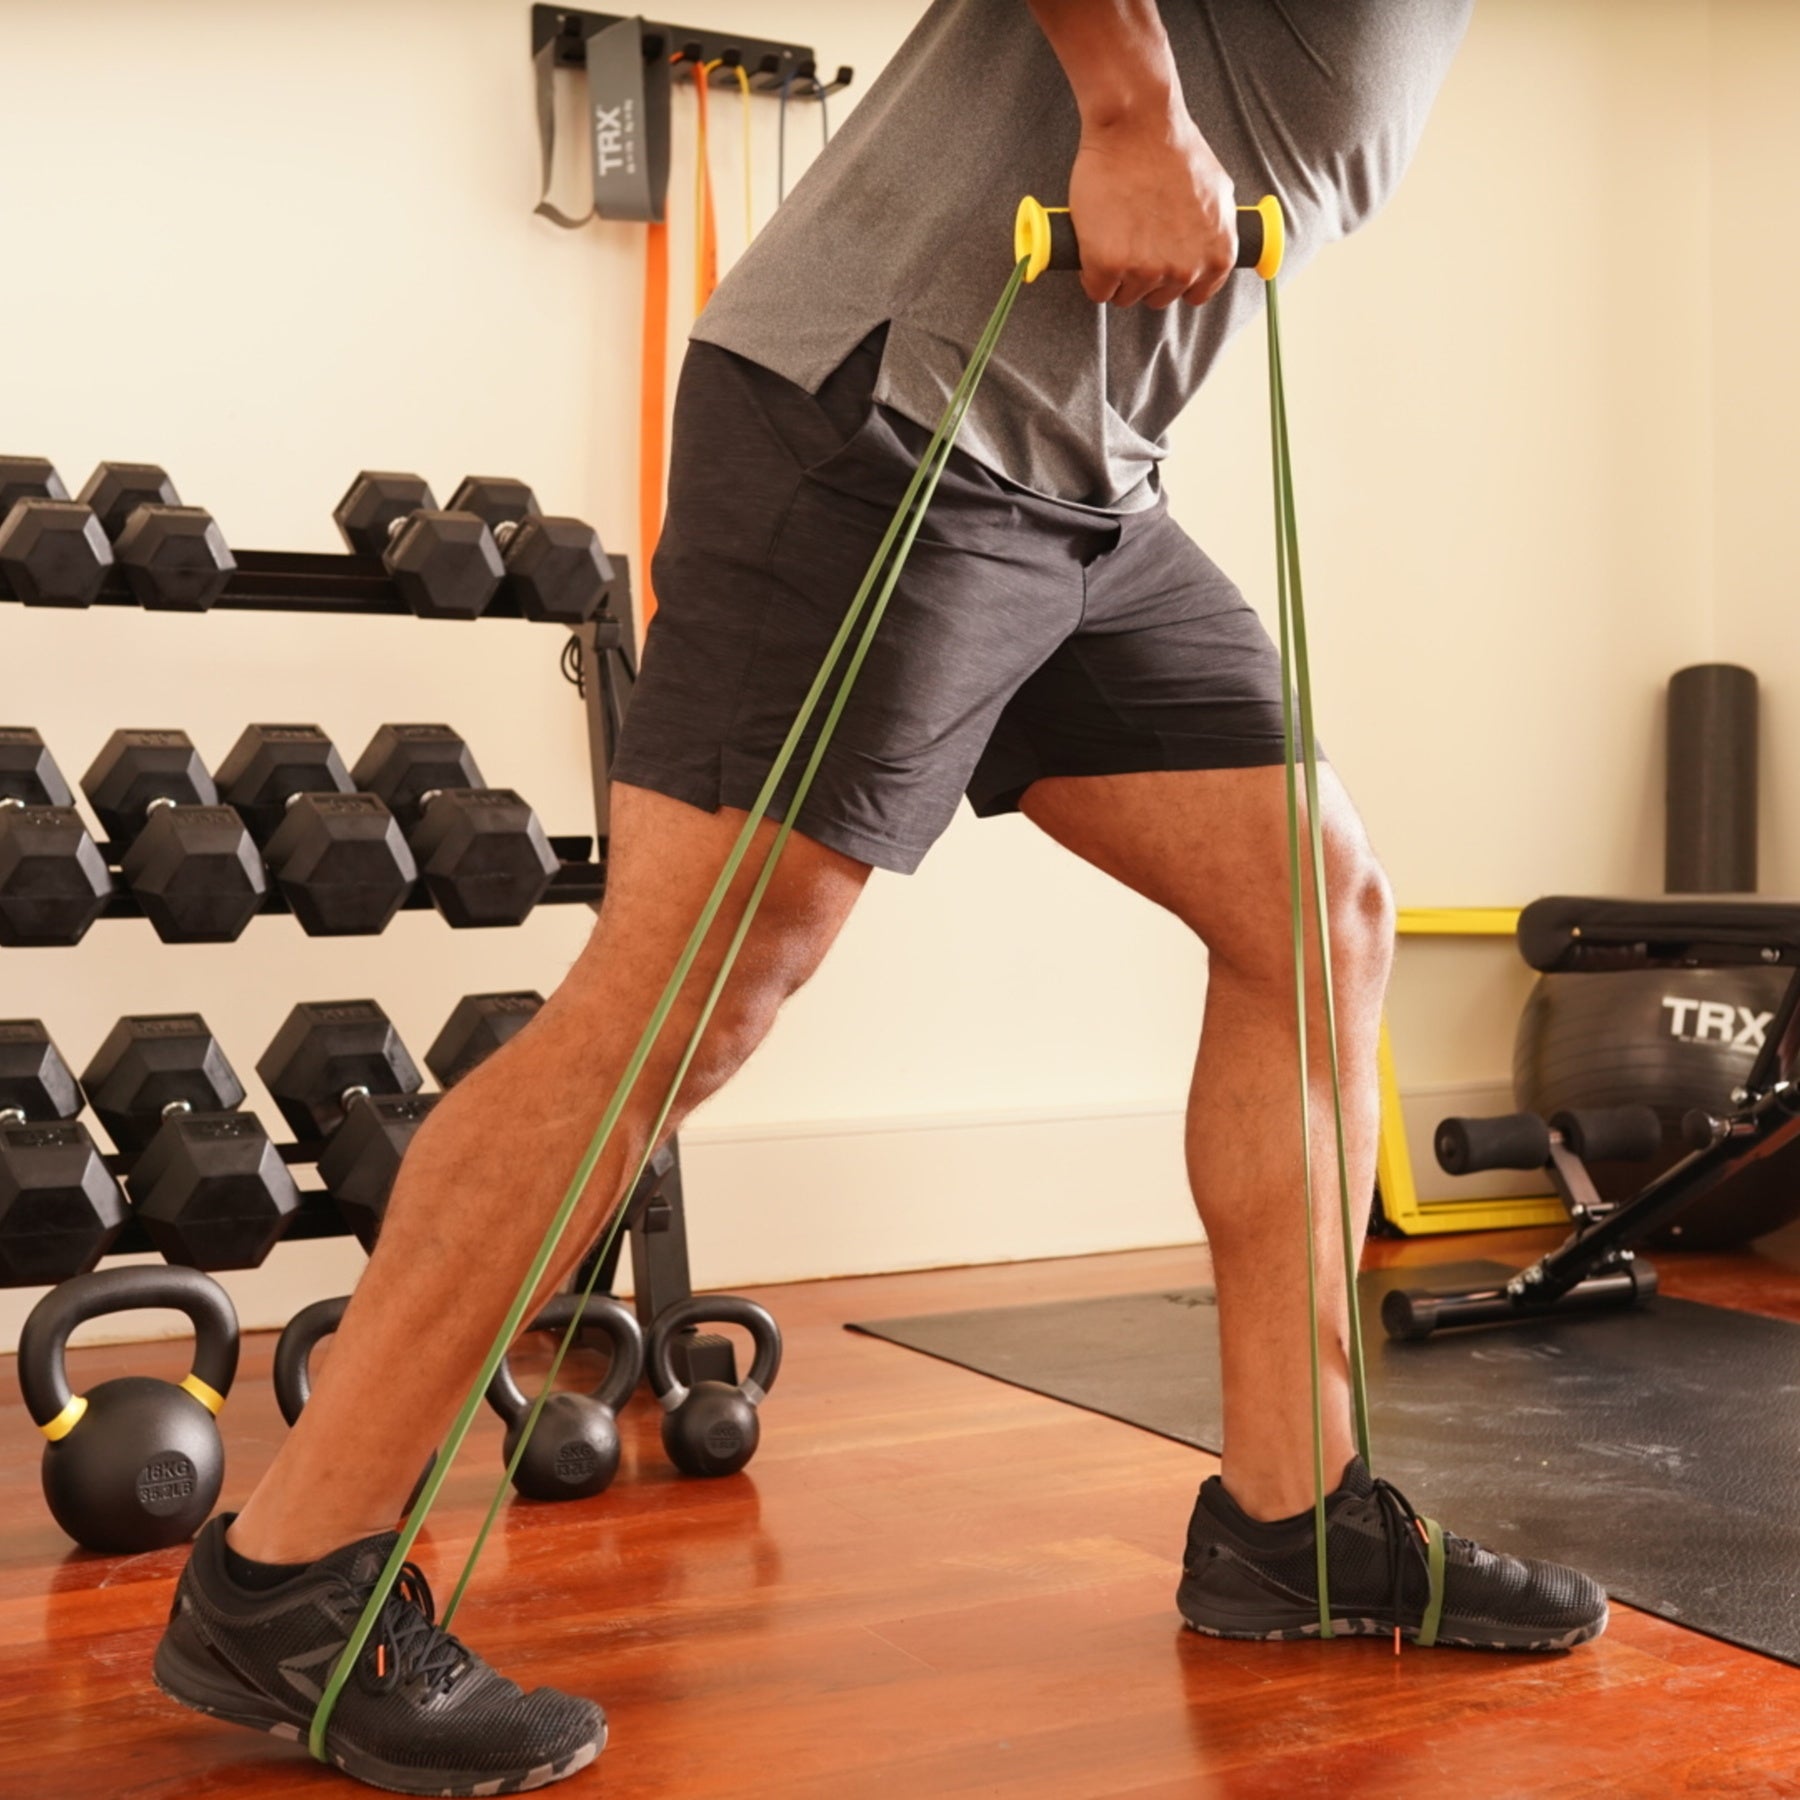 Draper's Strength - Resistance Bands for a Stronger Lower Body